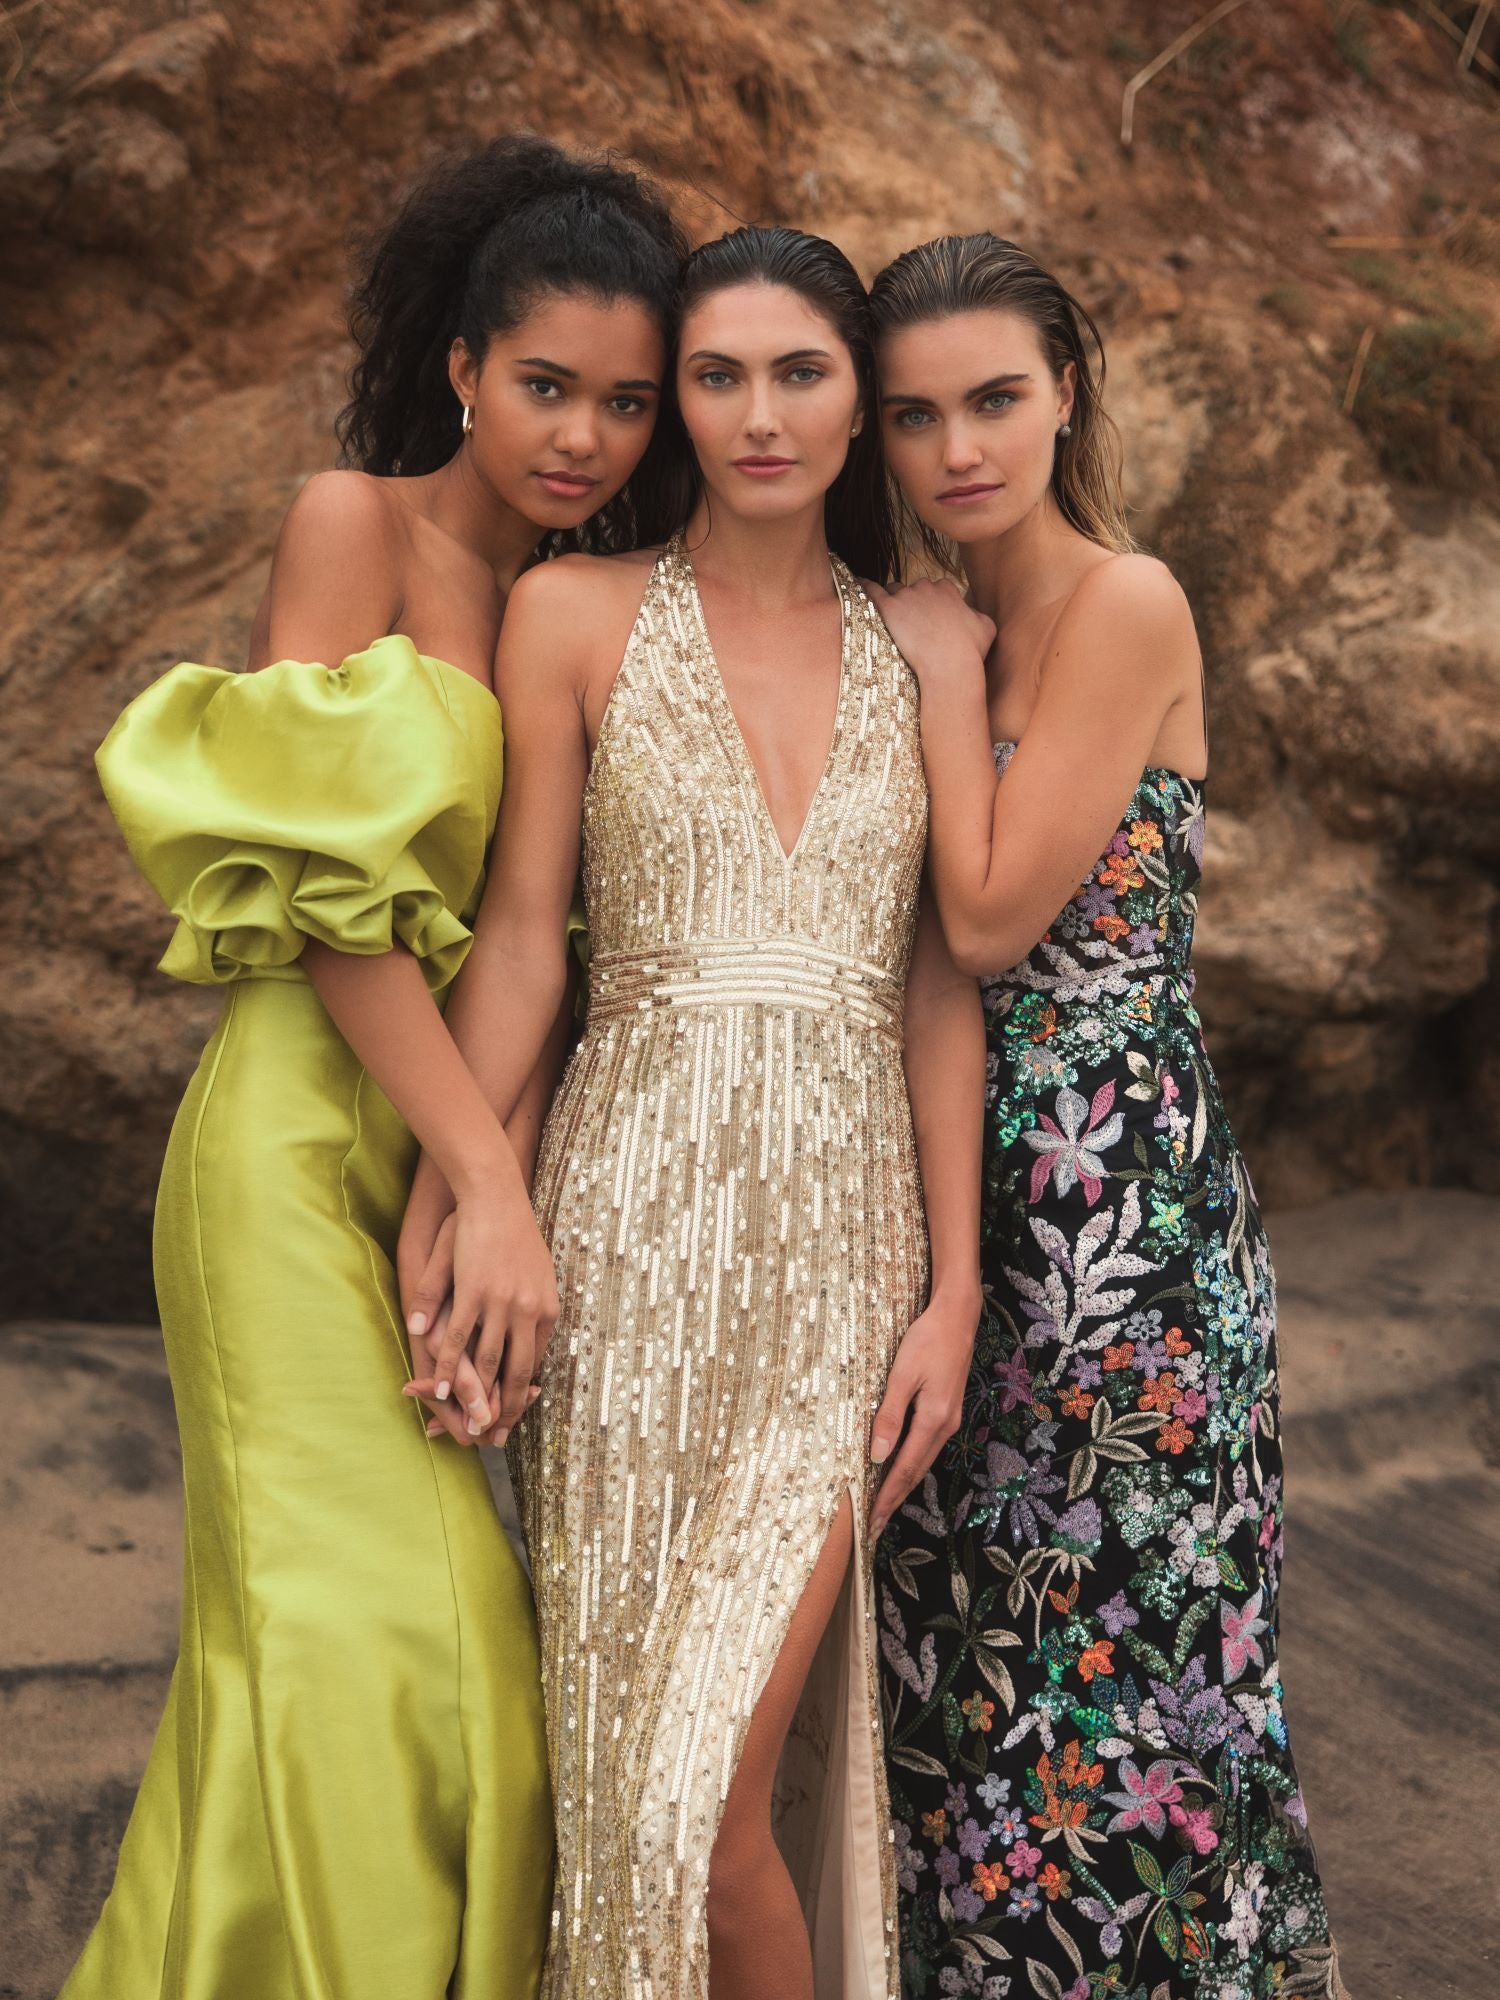 Dillard's - Making Plans Just to Wear this Dress! Shop Women's Formal  Dresses & Evening Gowns Here: https://bit.ly/38pQ7nr | Facebook